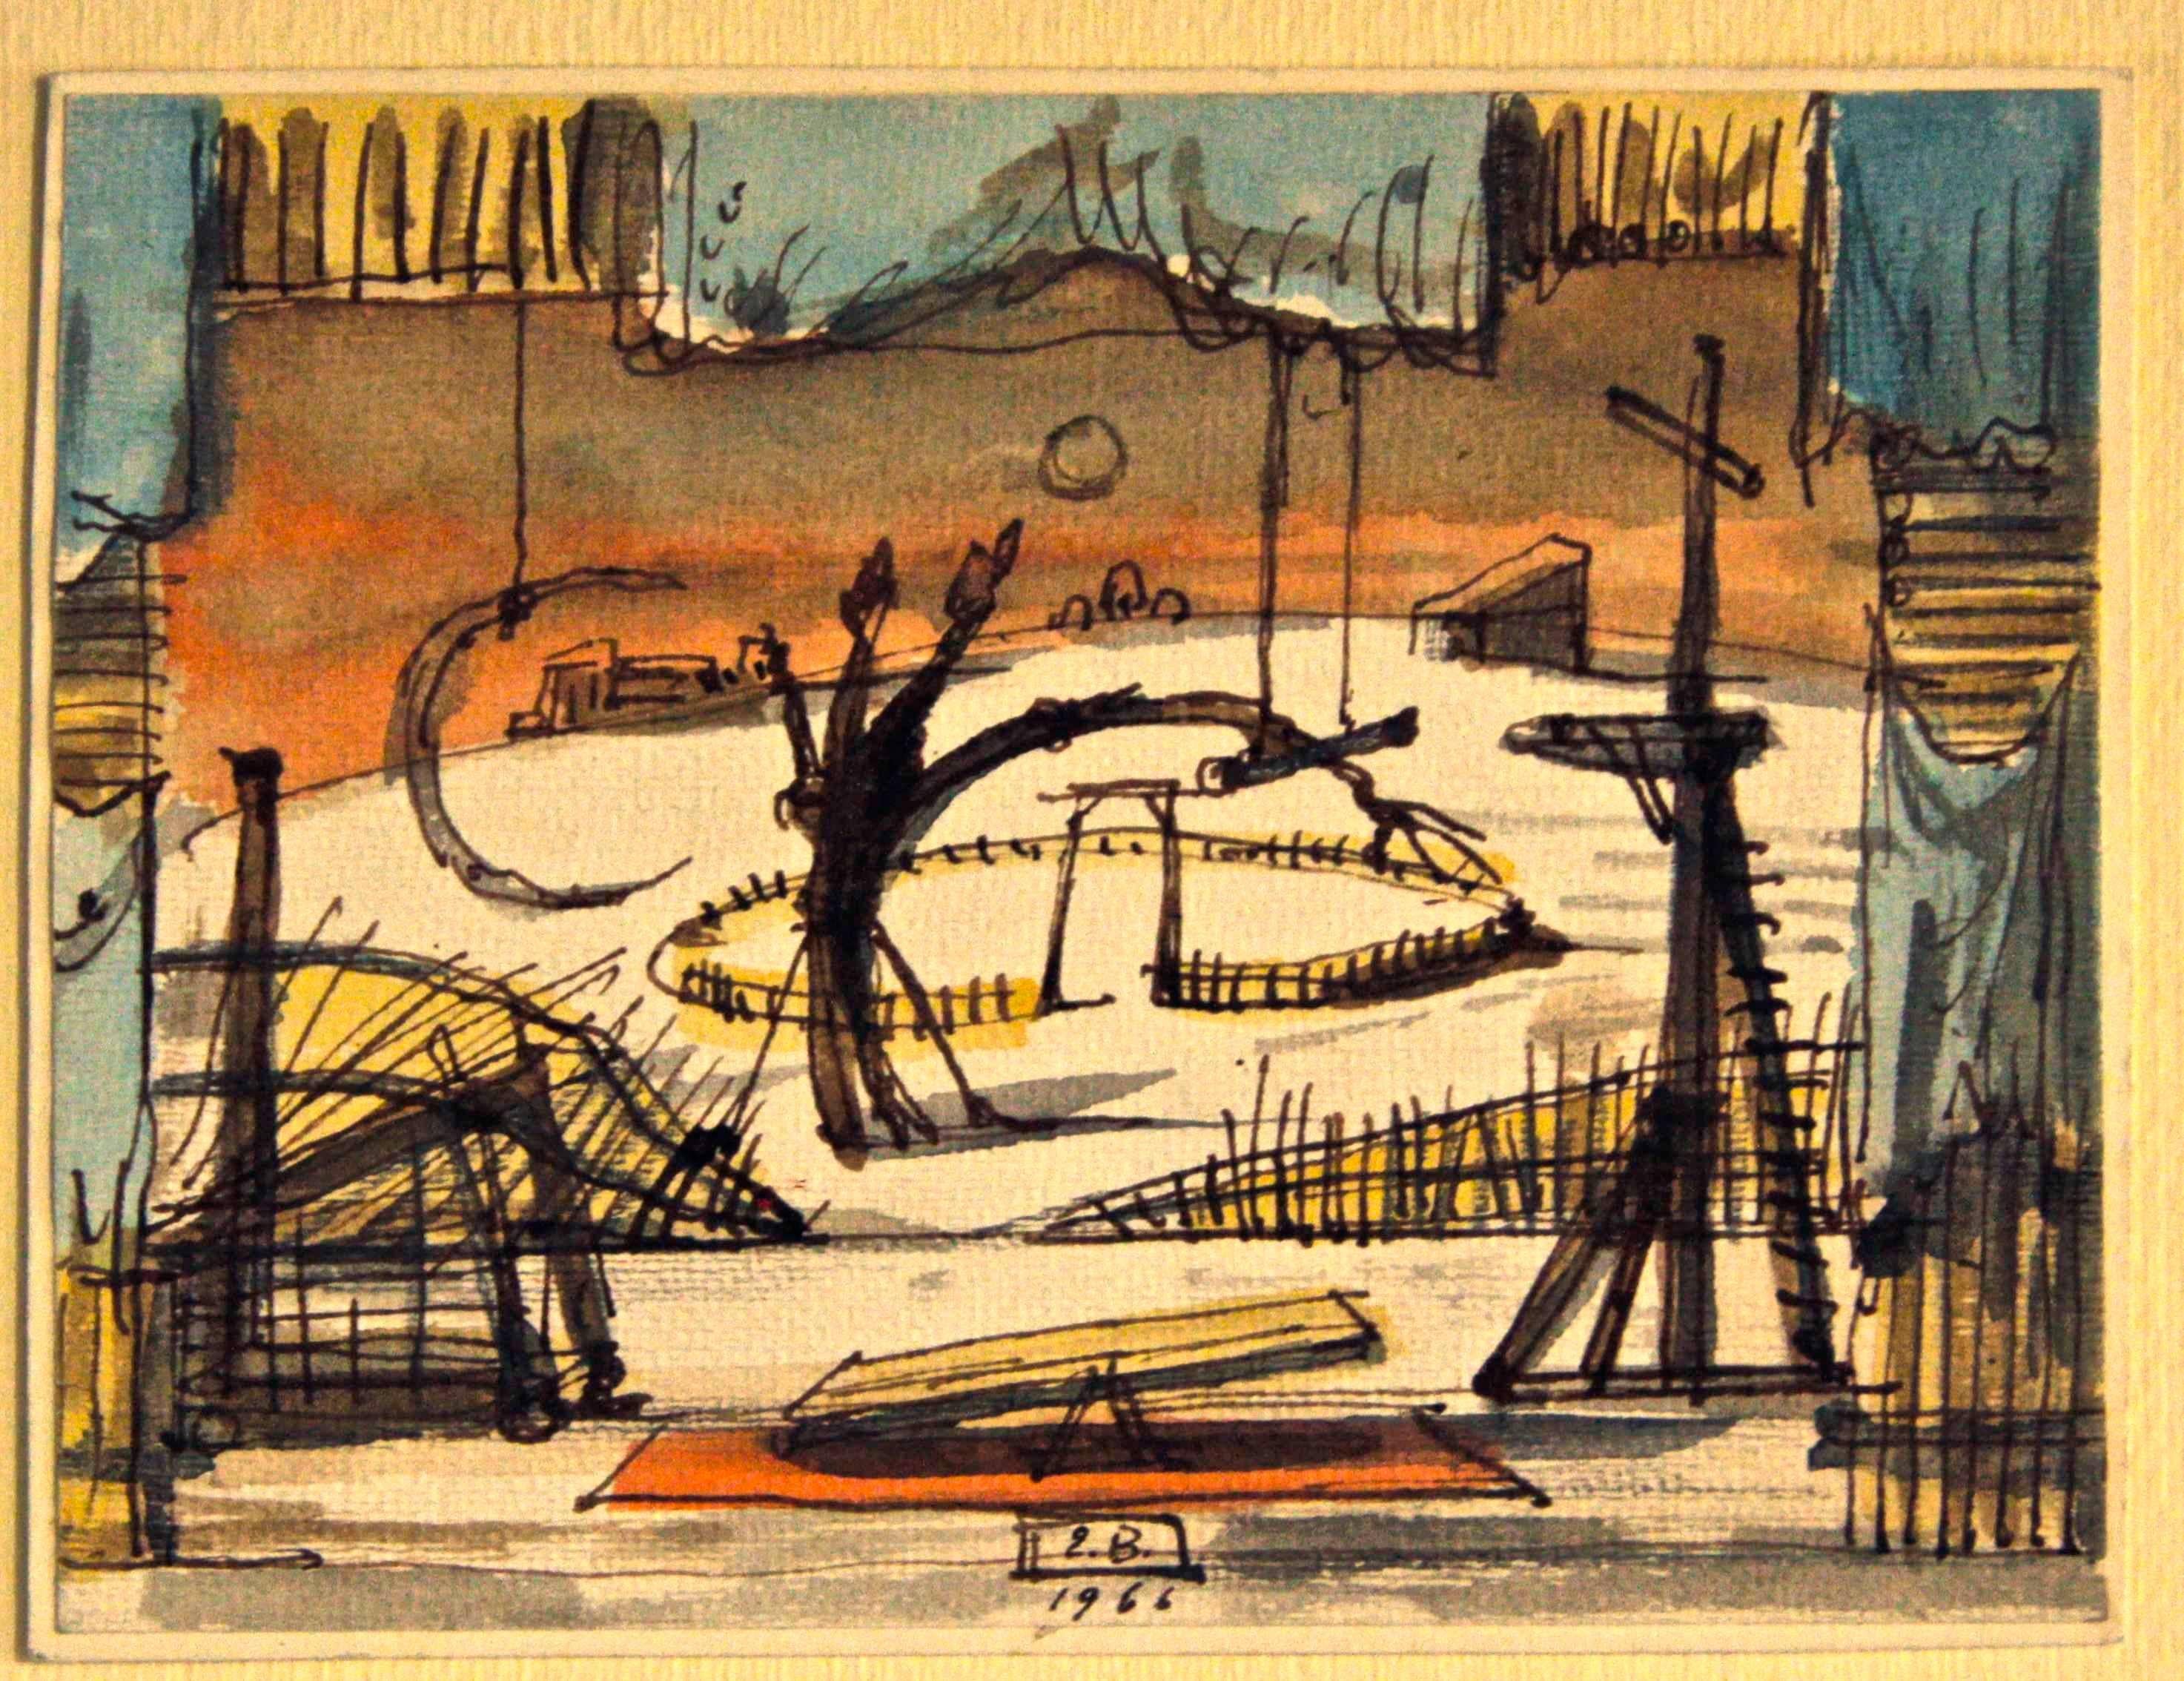 Study for a Scenography - Ink Drawing by Eugène Berman - 1966